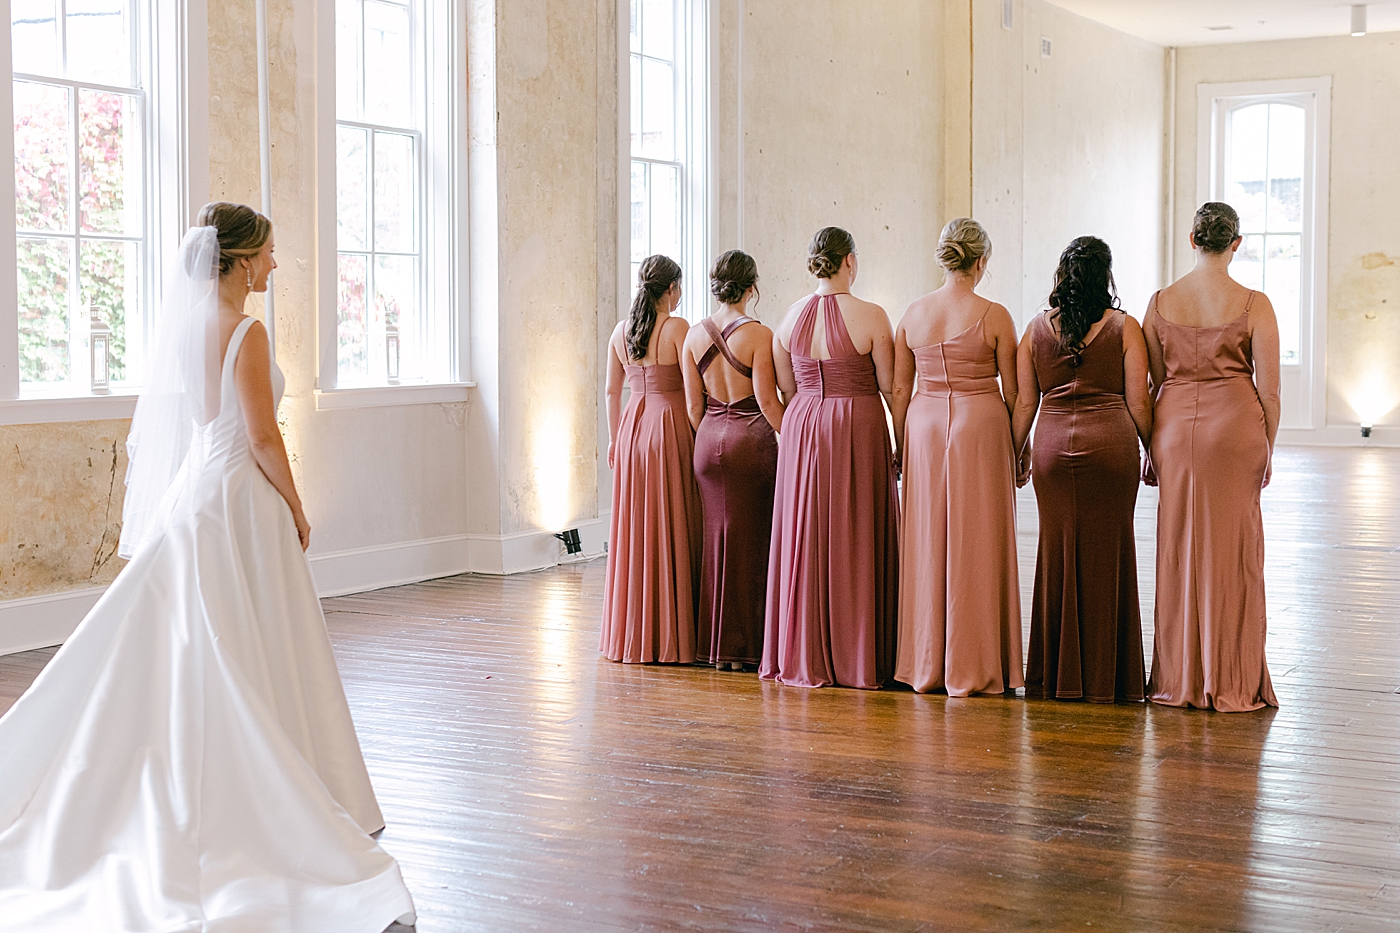 Bride doing a first look with her bridesmaids | Photo by Hope Helmuth Photography